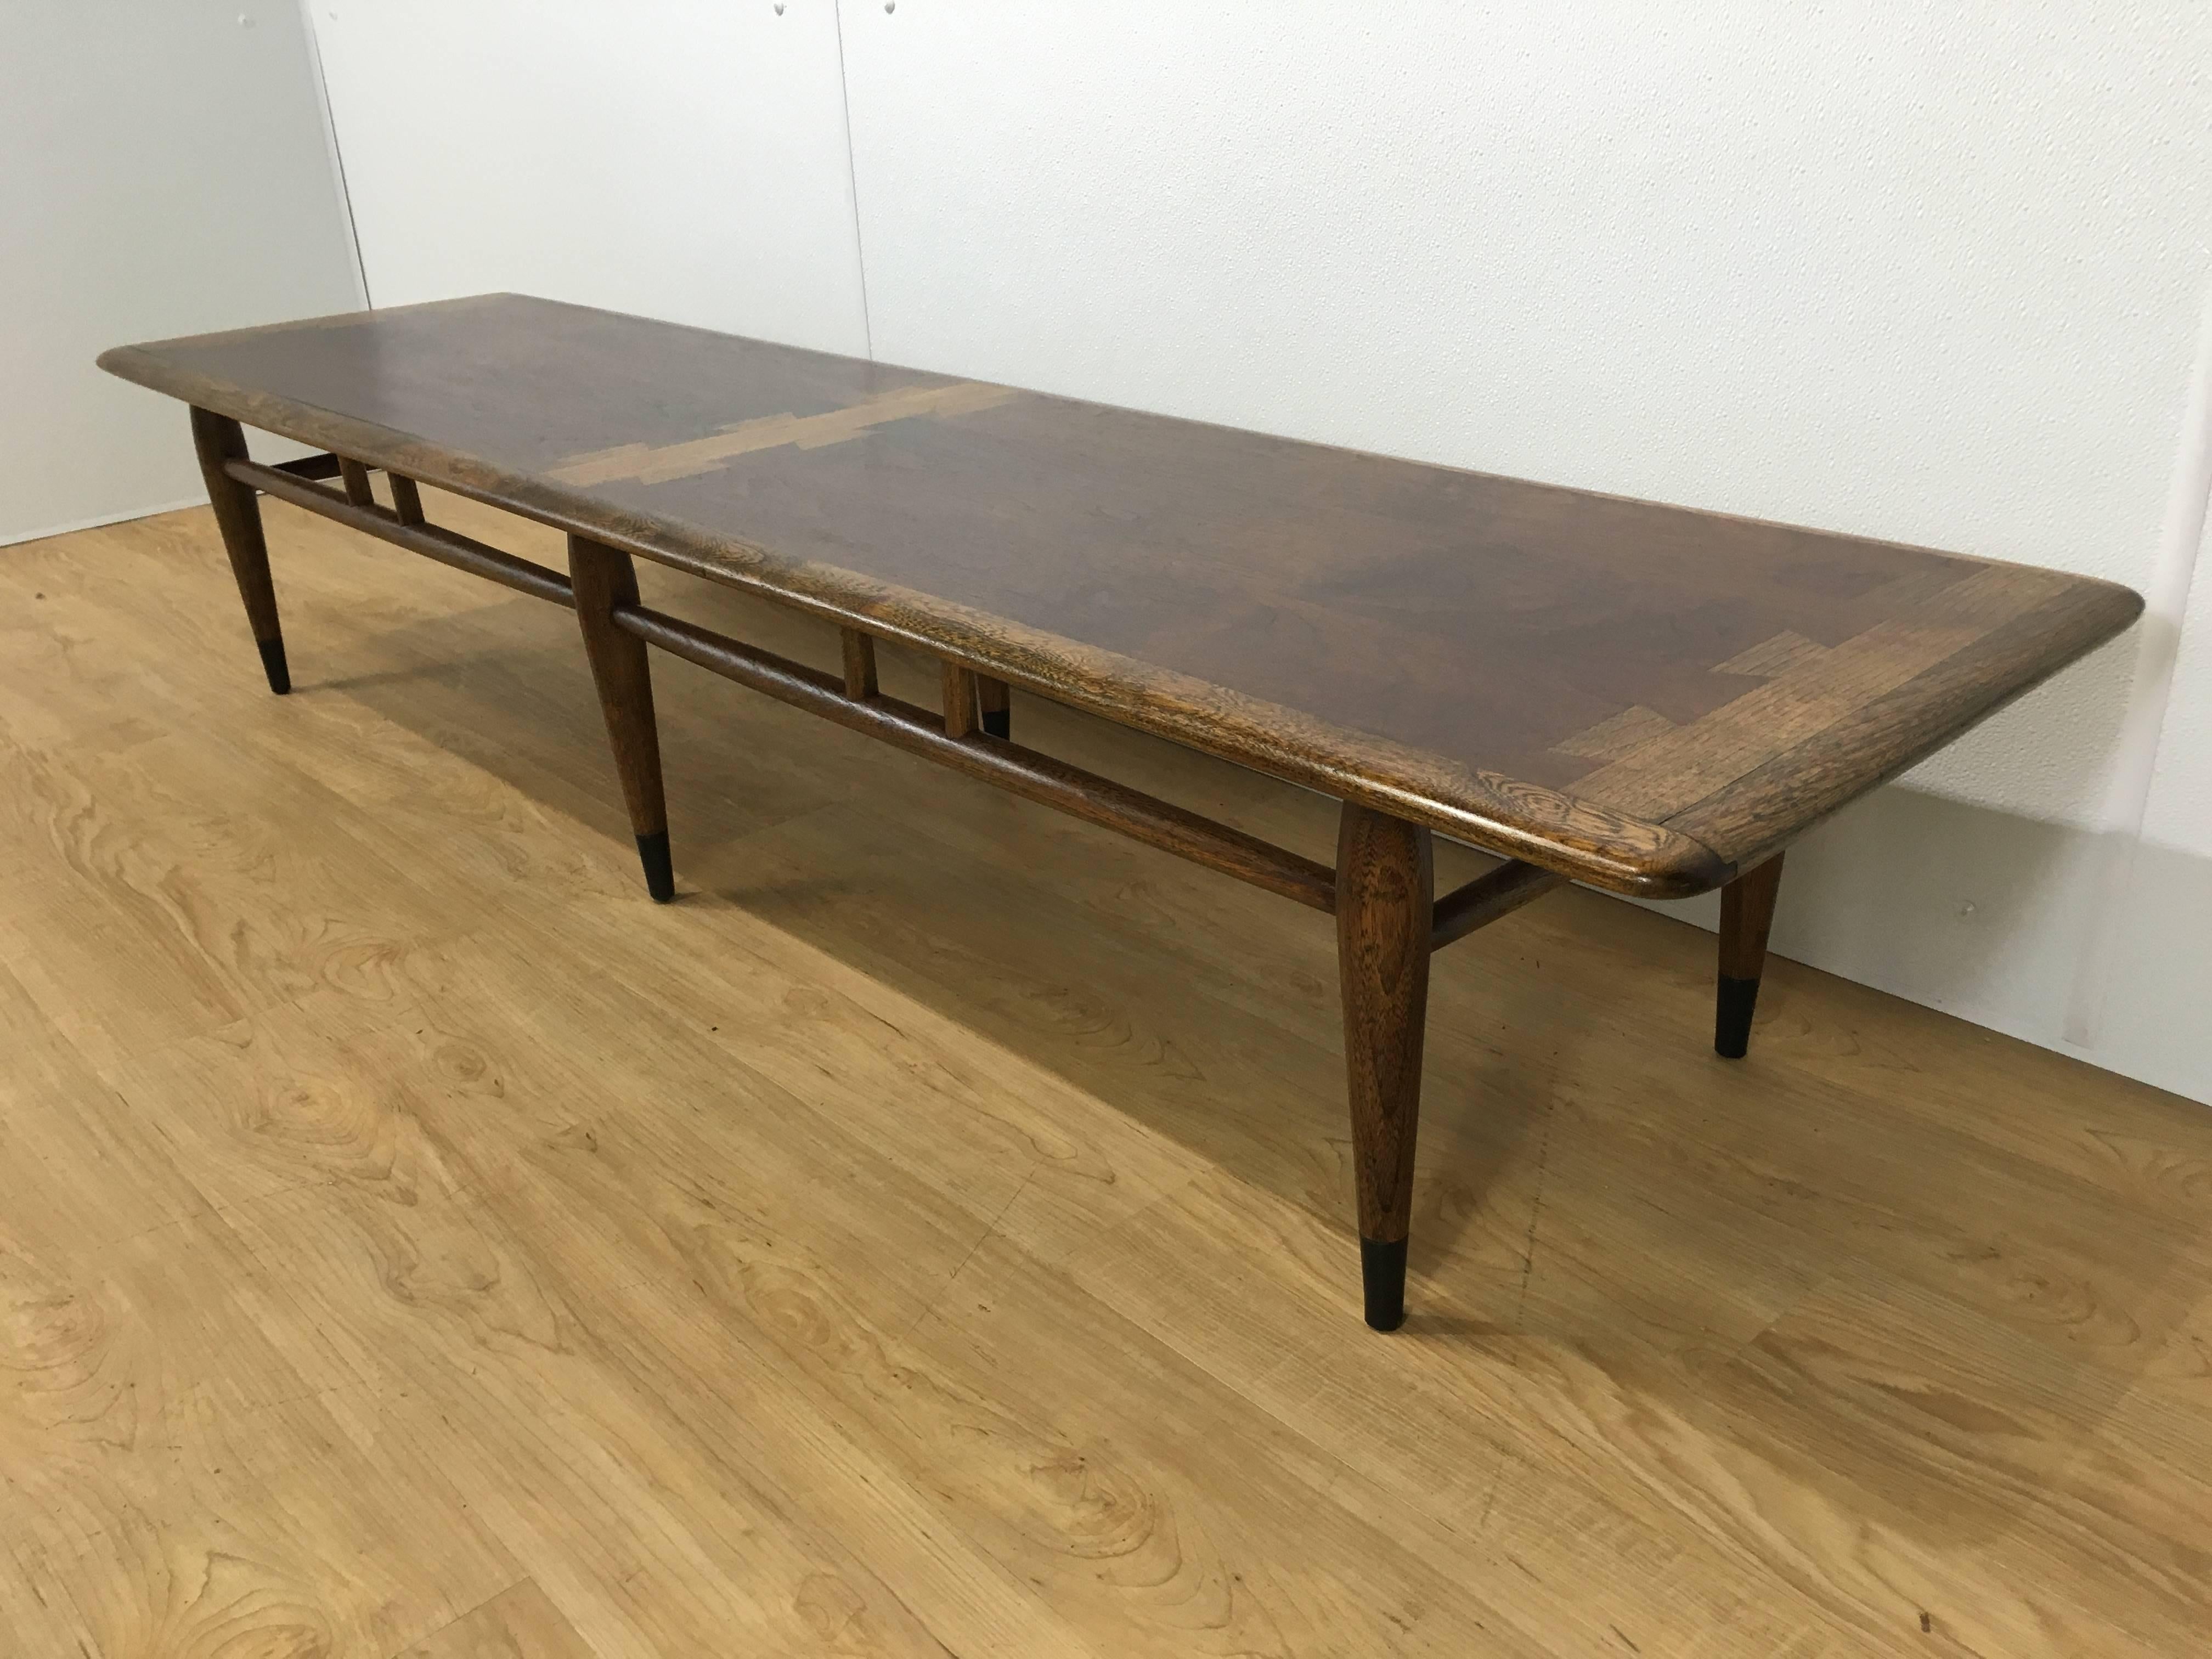 Extra long Lane Dovetail coffee table, 70" inches in length, iconic Mid-Century design. Similar to Grinard #1112. Expertly finished.